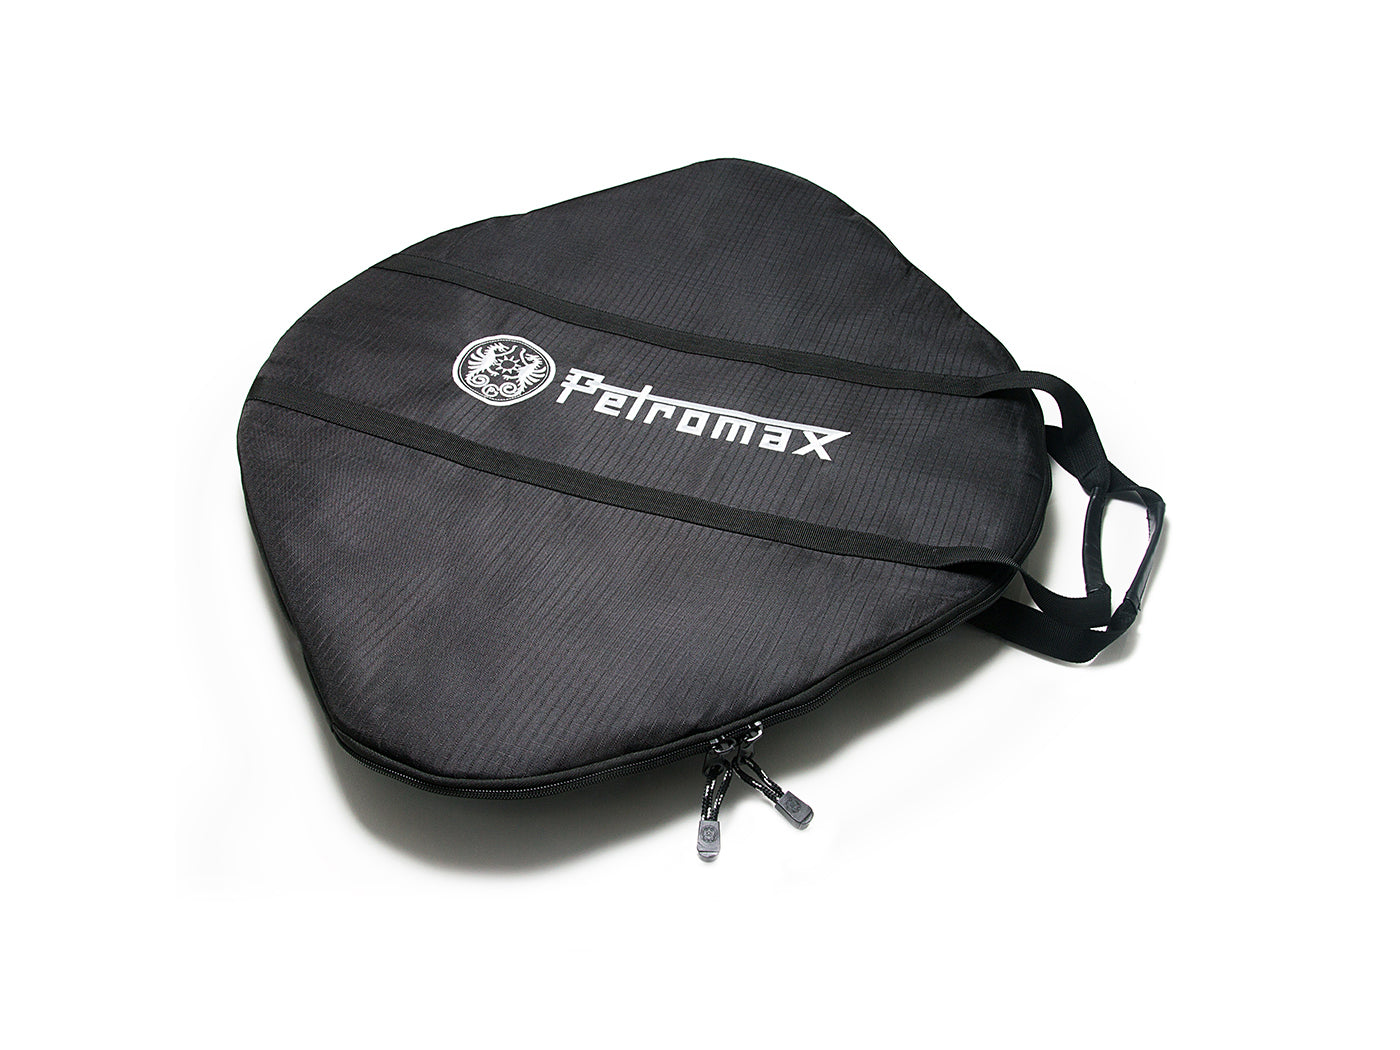 Transport bag for the Petromax fire bowl